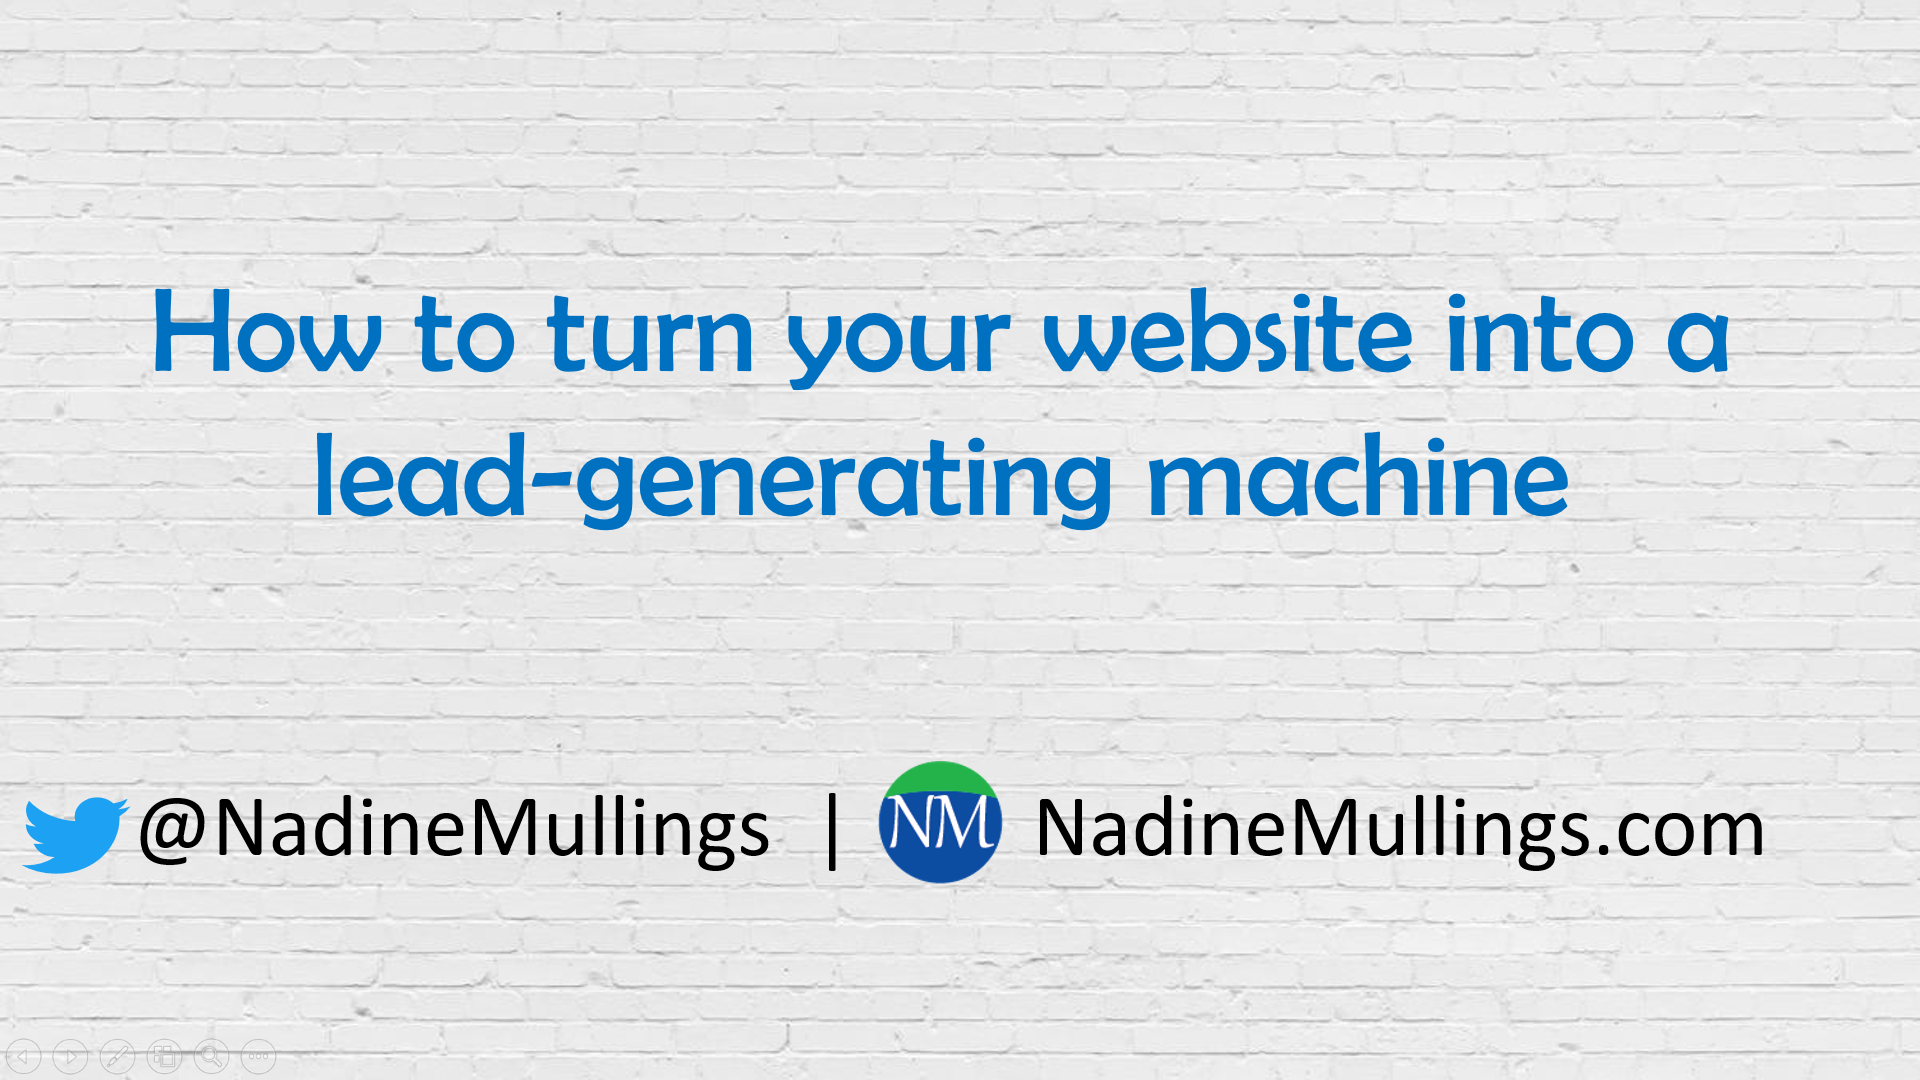 How to turn your website into a lead-generating machine